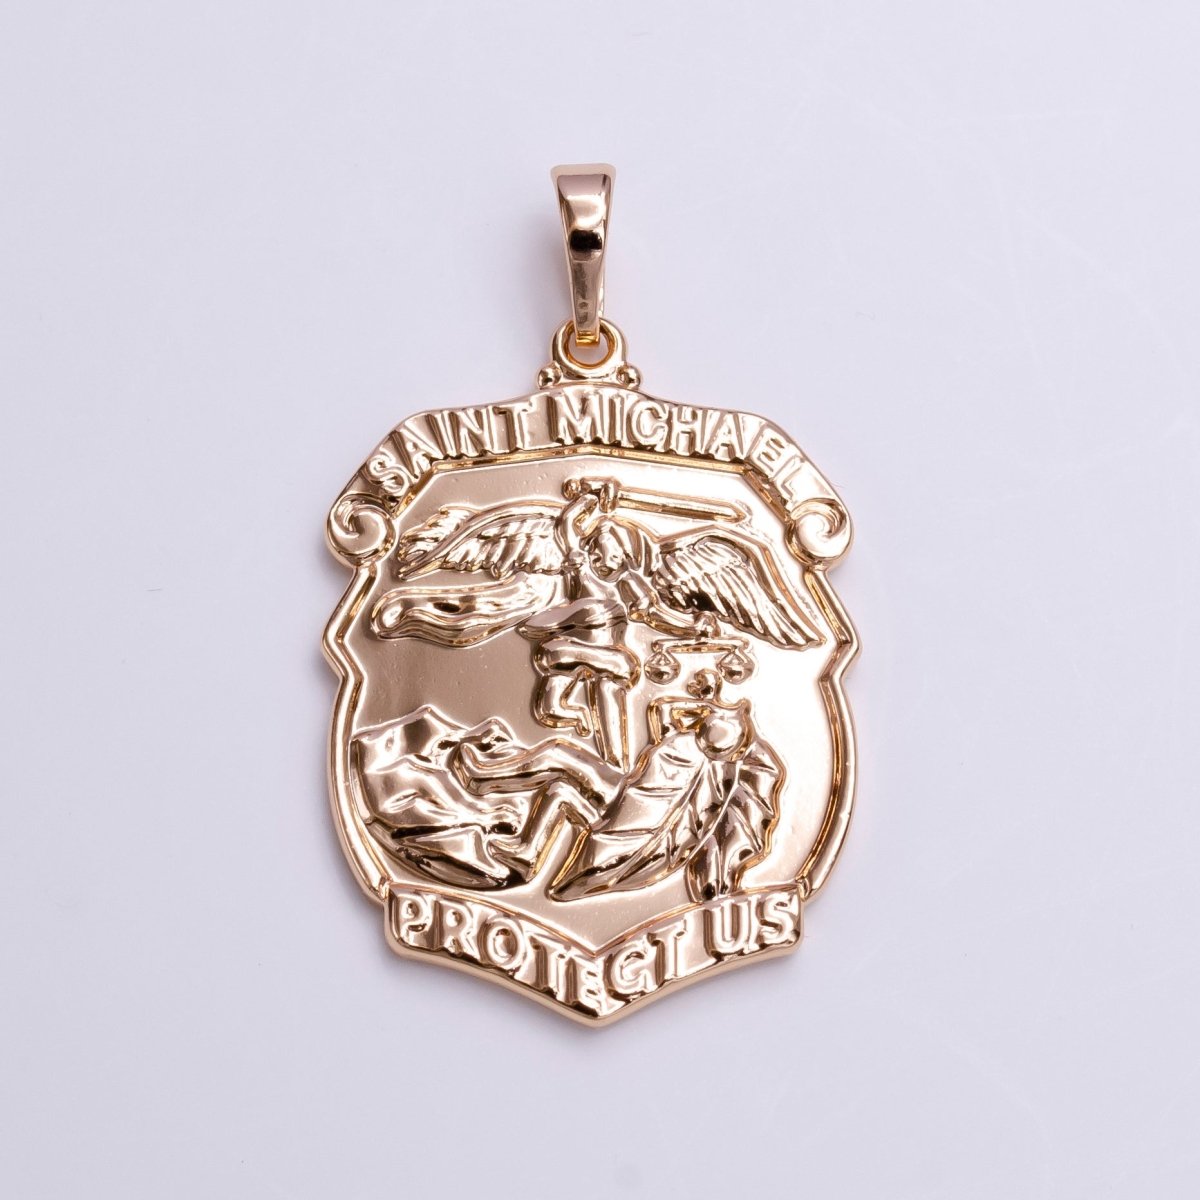 "Saint Michael Protect Us" Prayer Engraved Double Sided Rosey Gold Pendant | AA396 - DLUXCA